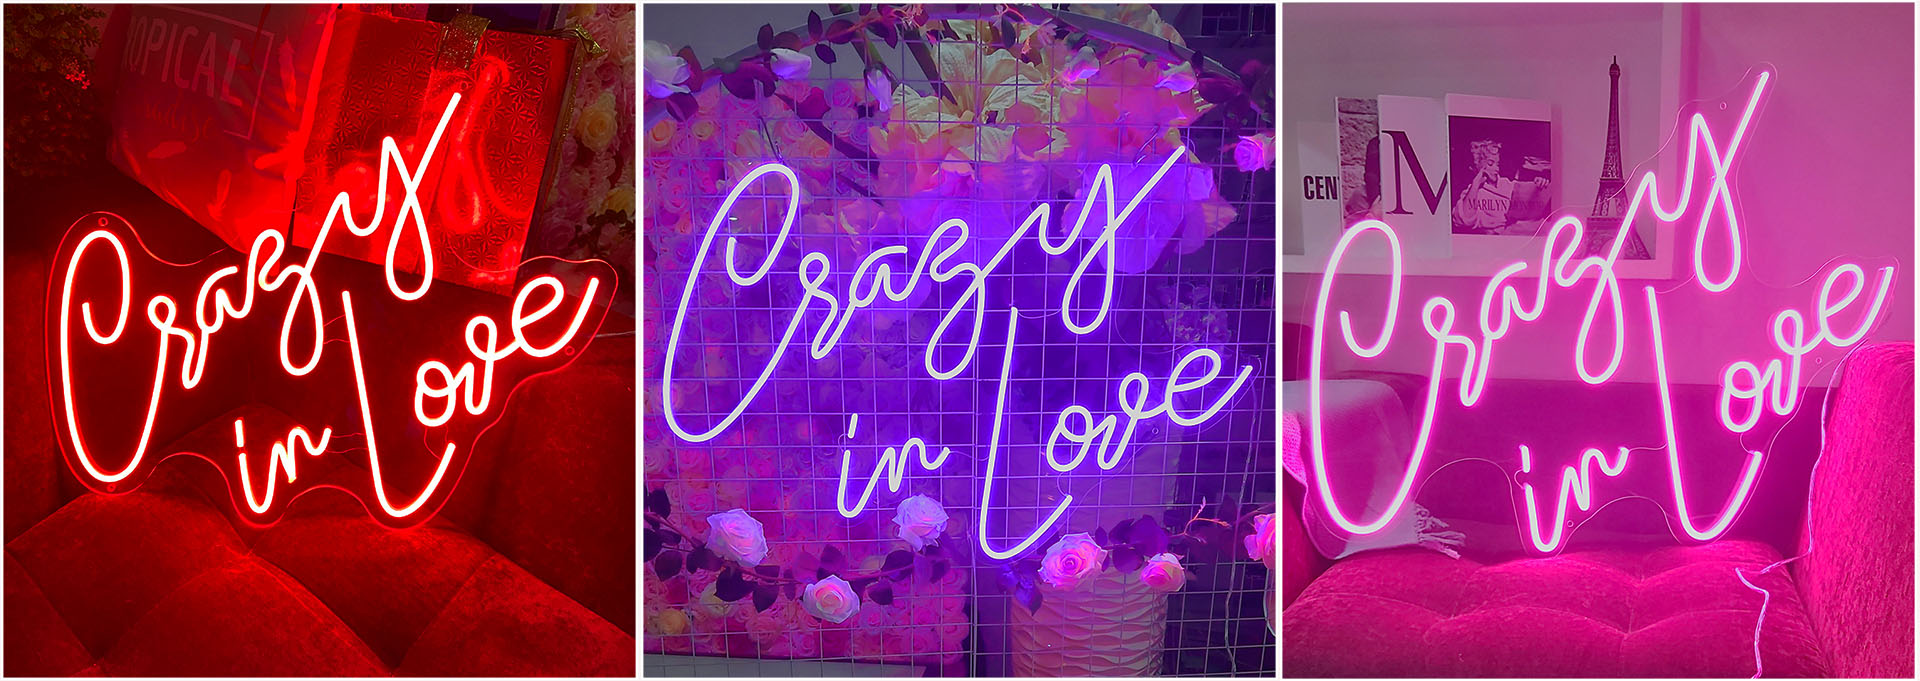 Crazy in love wedding sign for sale